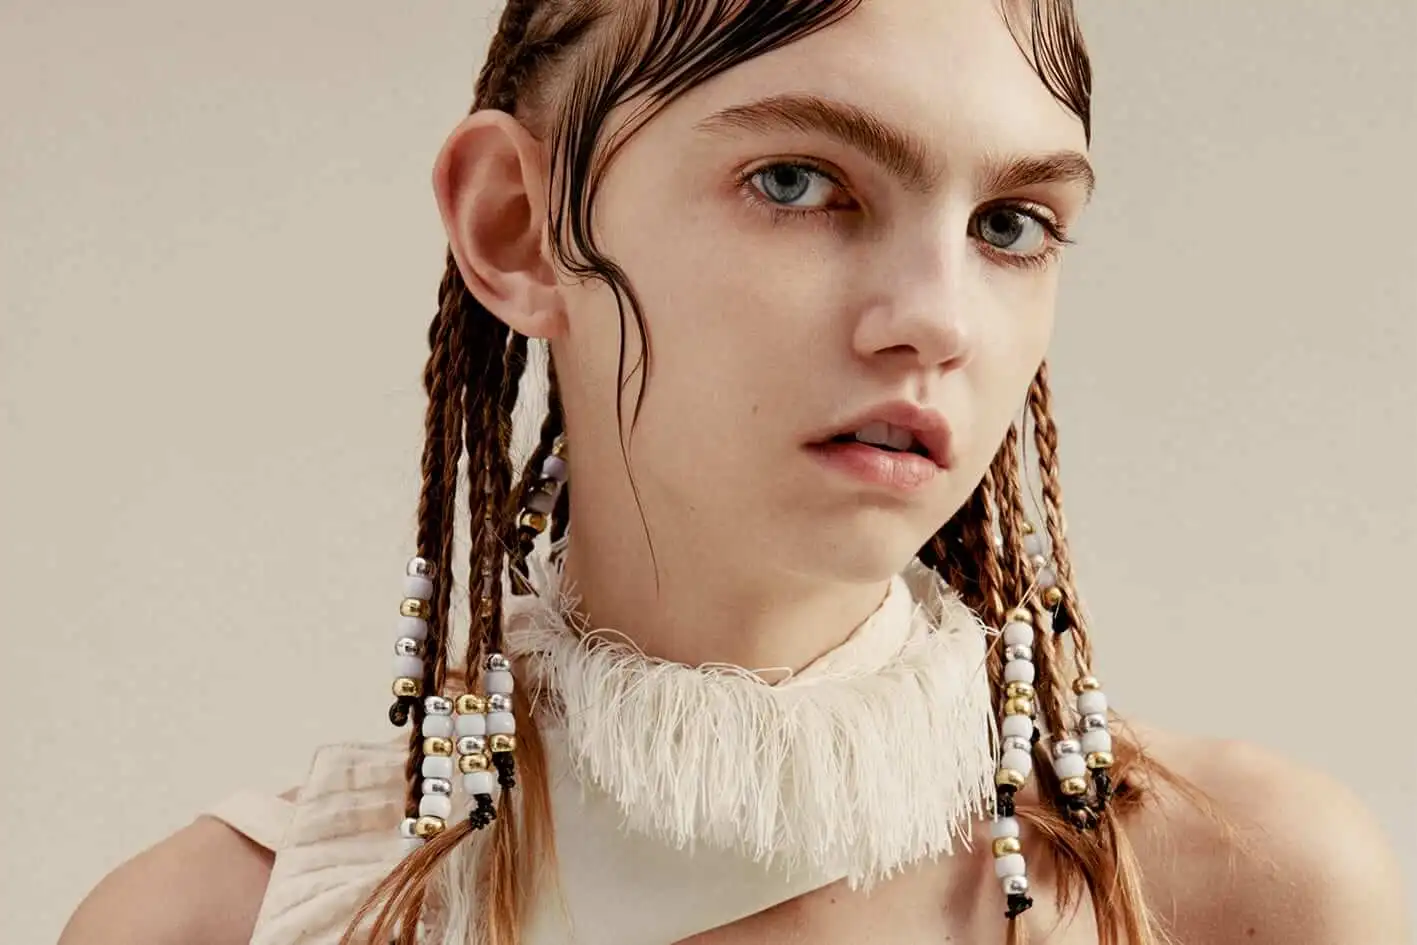 Fashion-and-Cultural-Appropriation-Navigating-the-Line